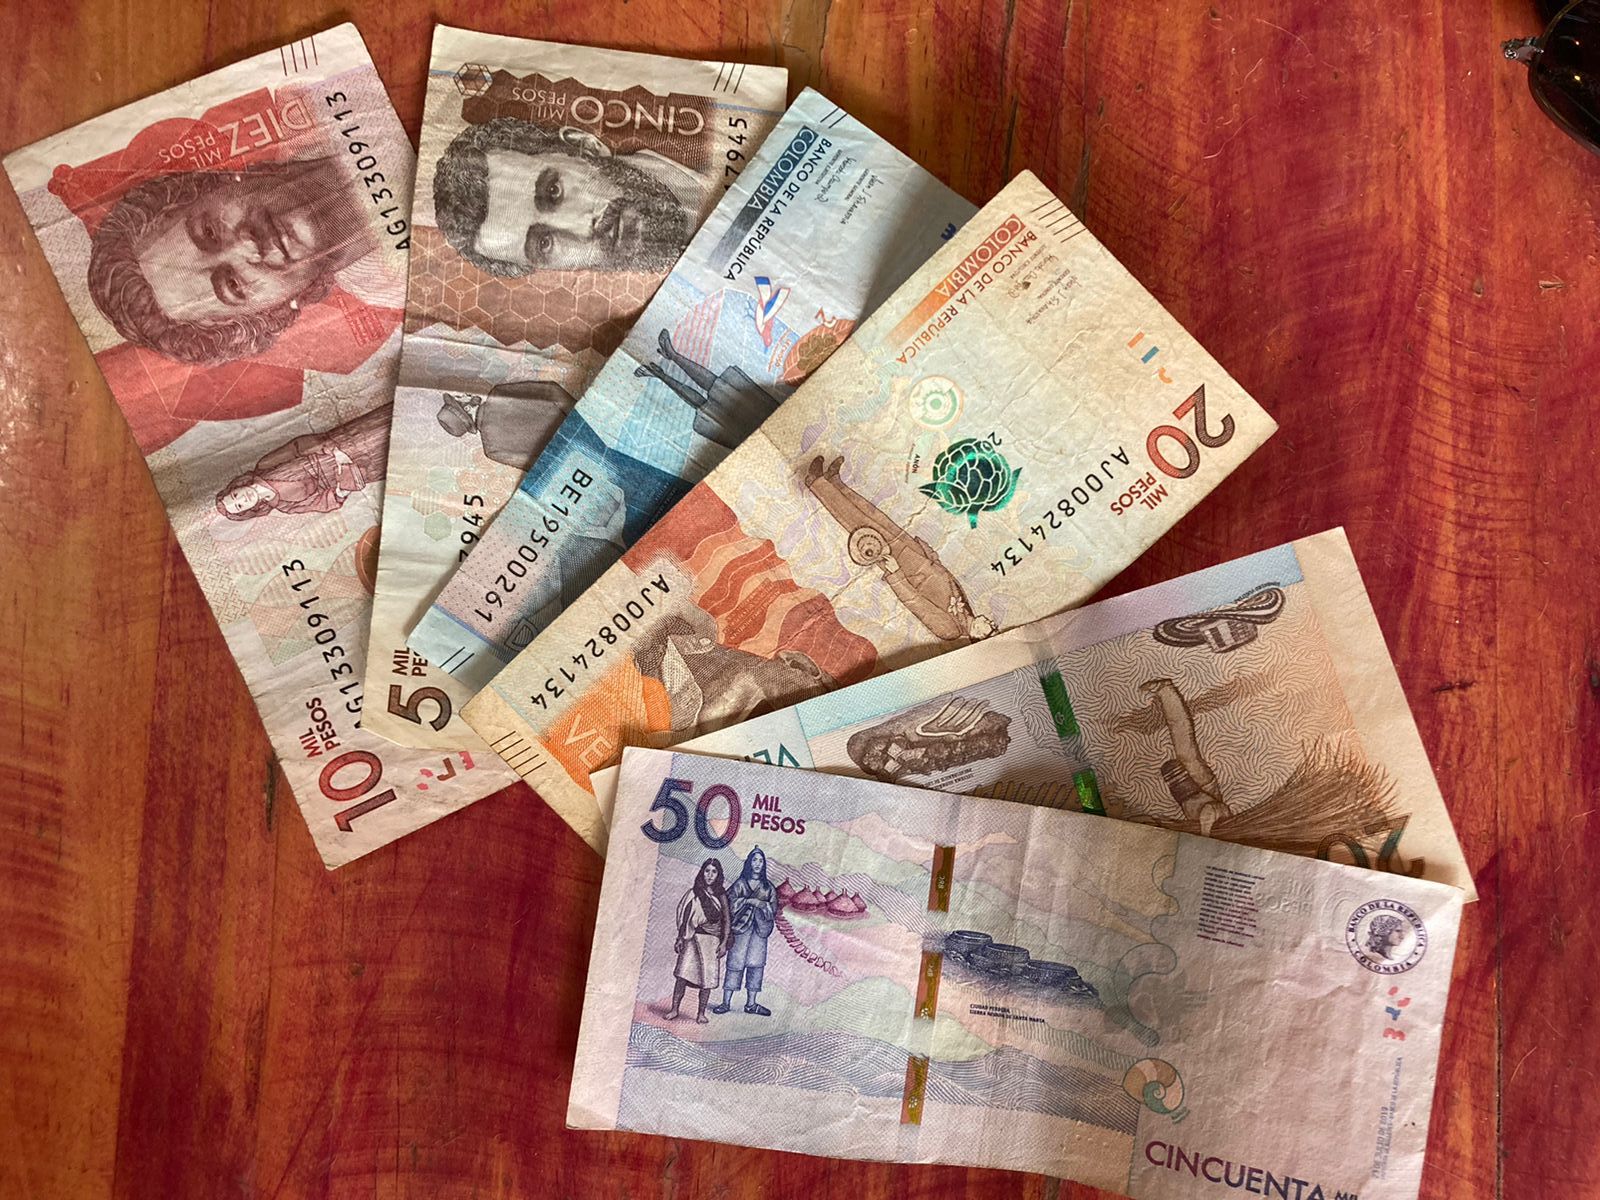 The almighty dollar and the Colombian peso